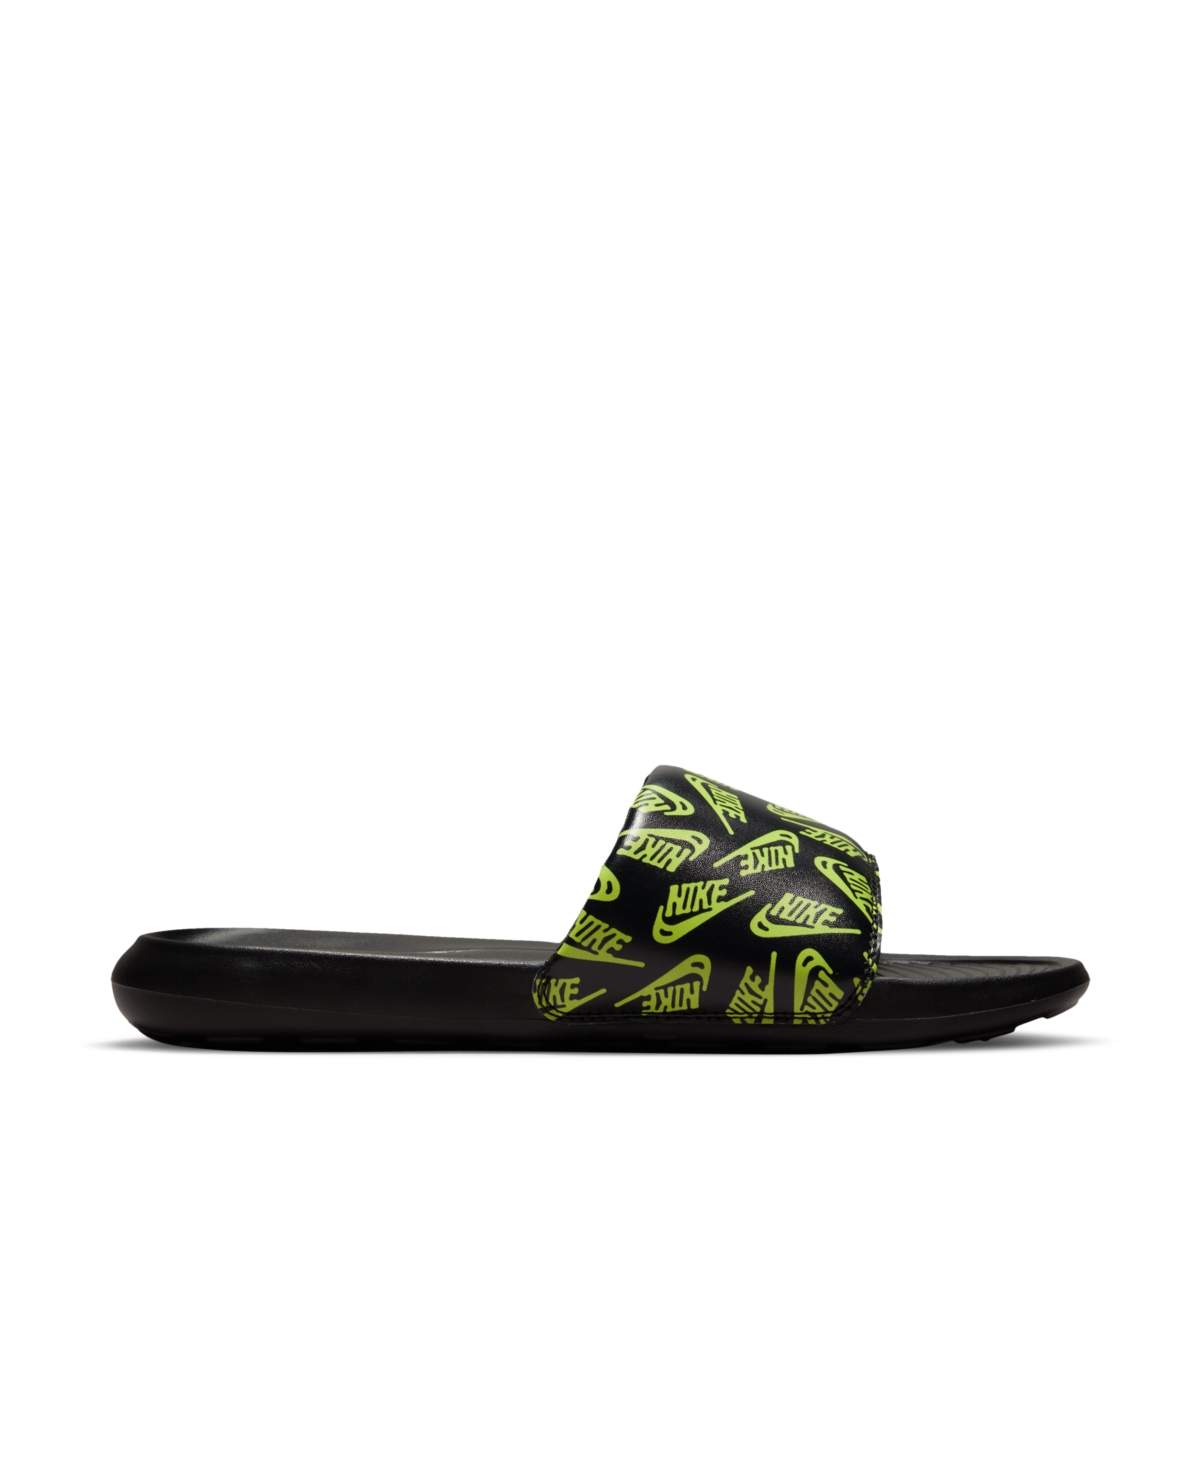 UPC 195869180250 product image for Nike Men's Victori One All-Over Print Slide Sandals from Finish Line | upcitemdb.com